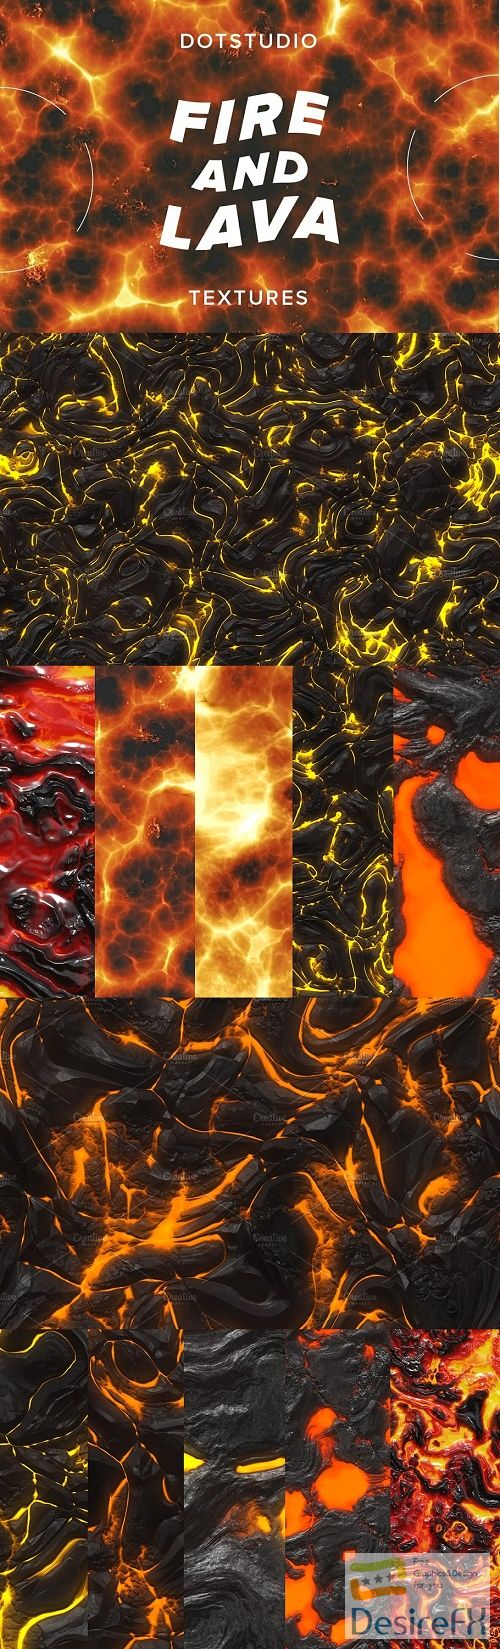 Fire and lava textures - 4278355